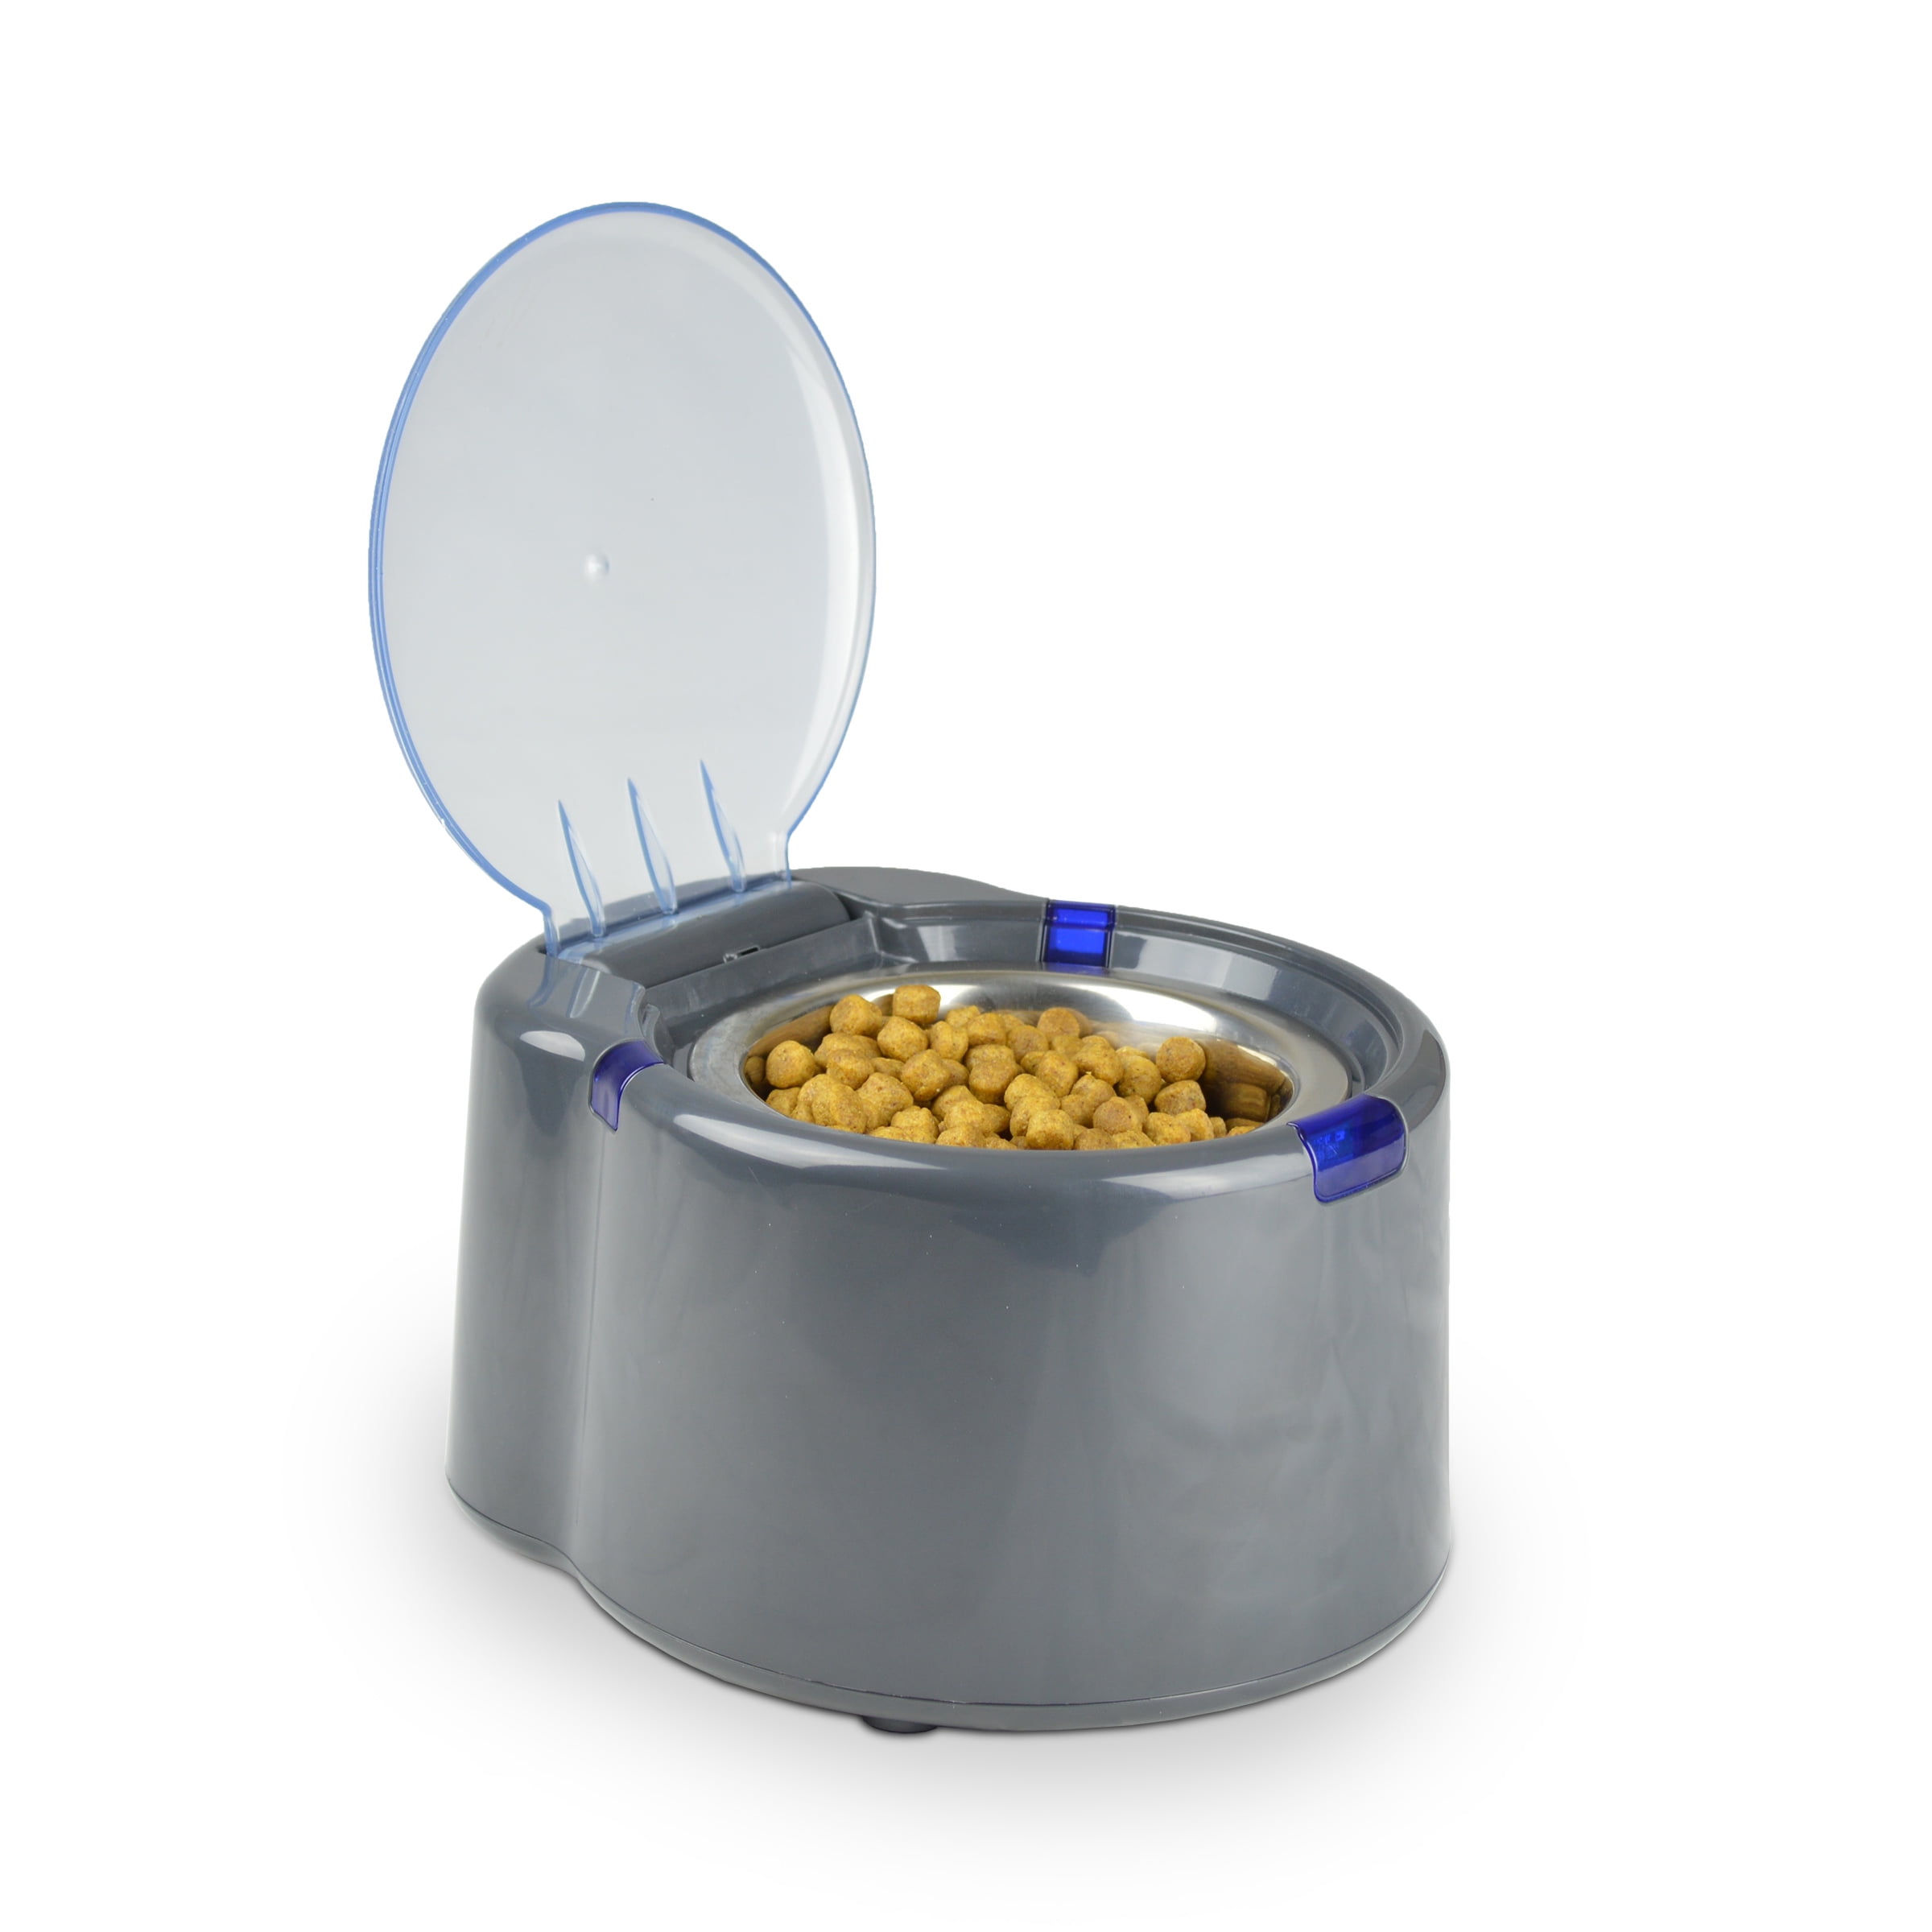 OurPets SmartLink Automatic Pet Feeder 